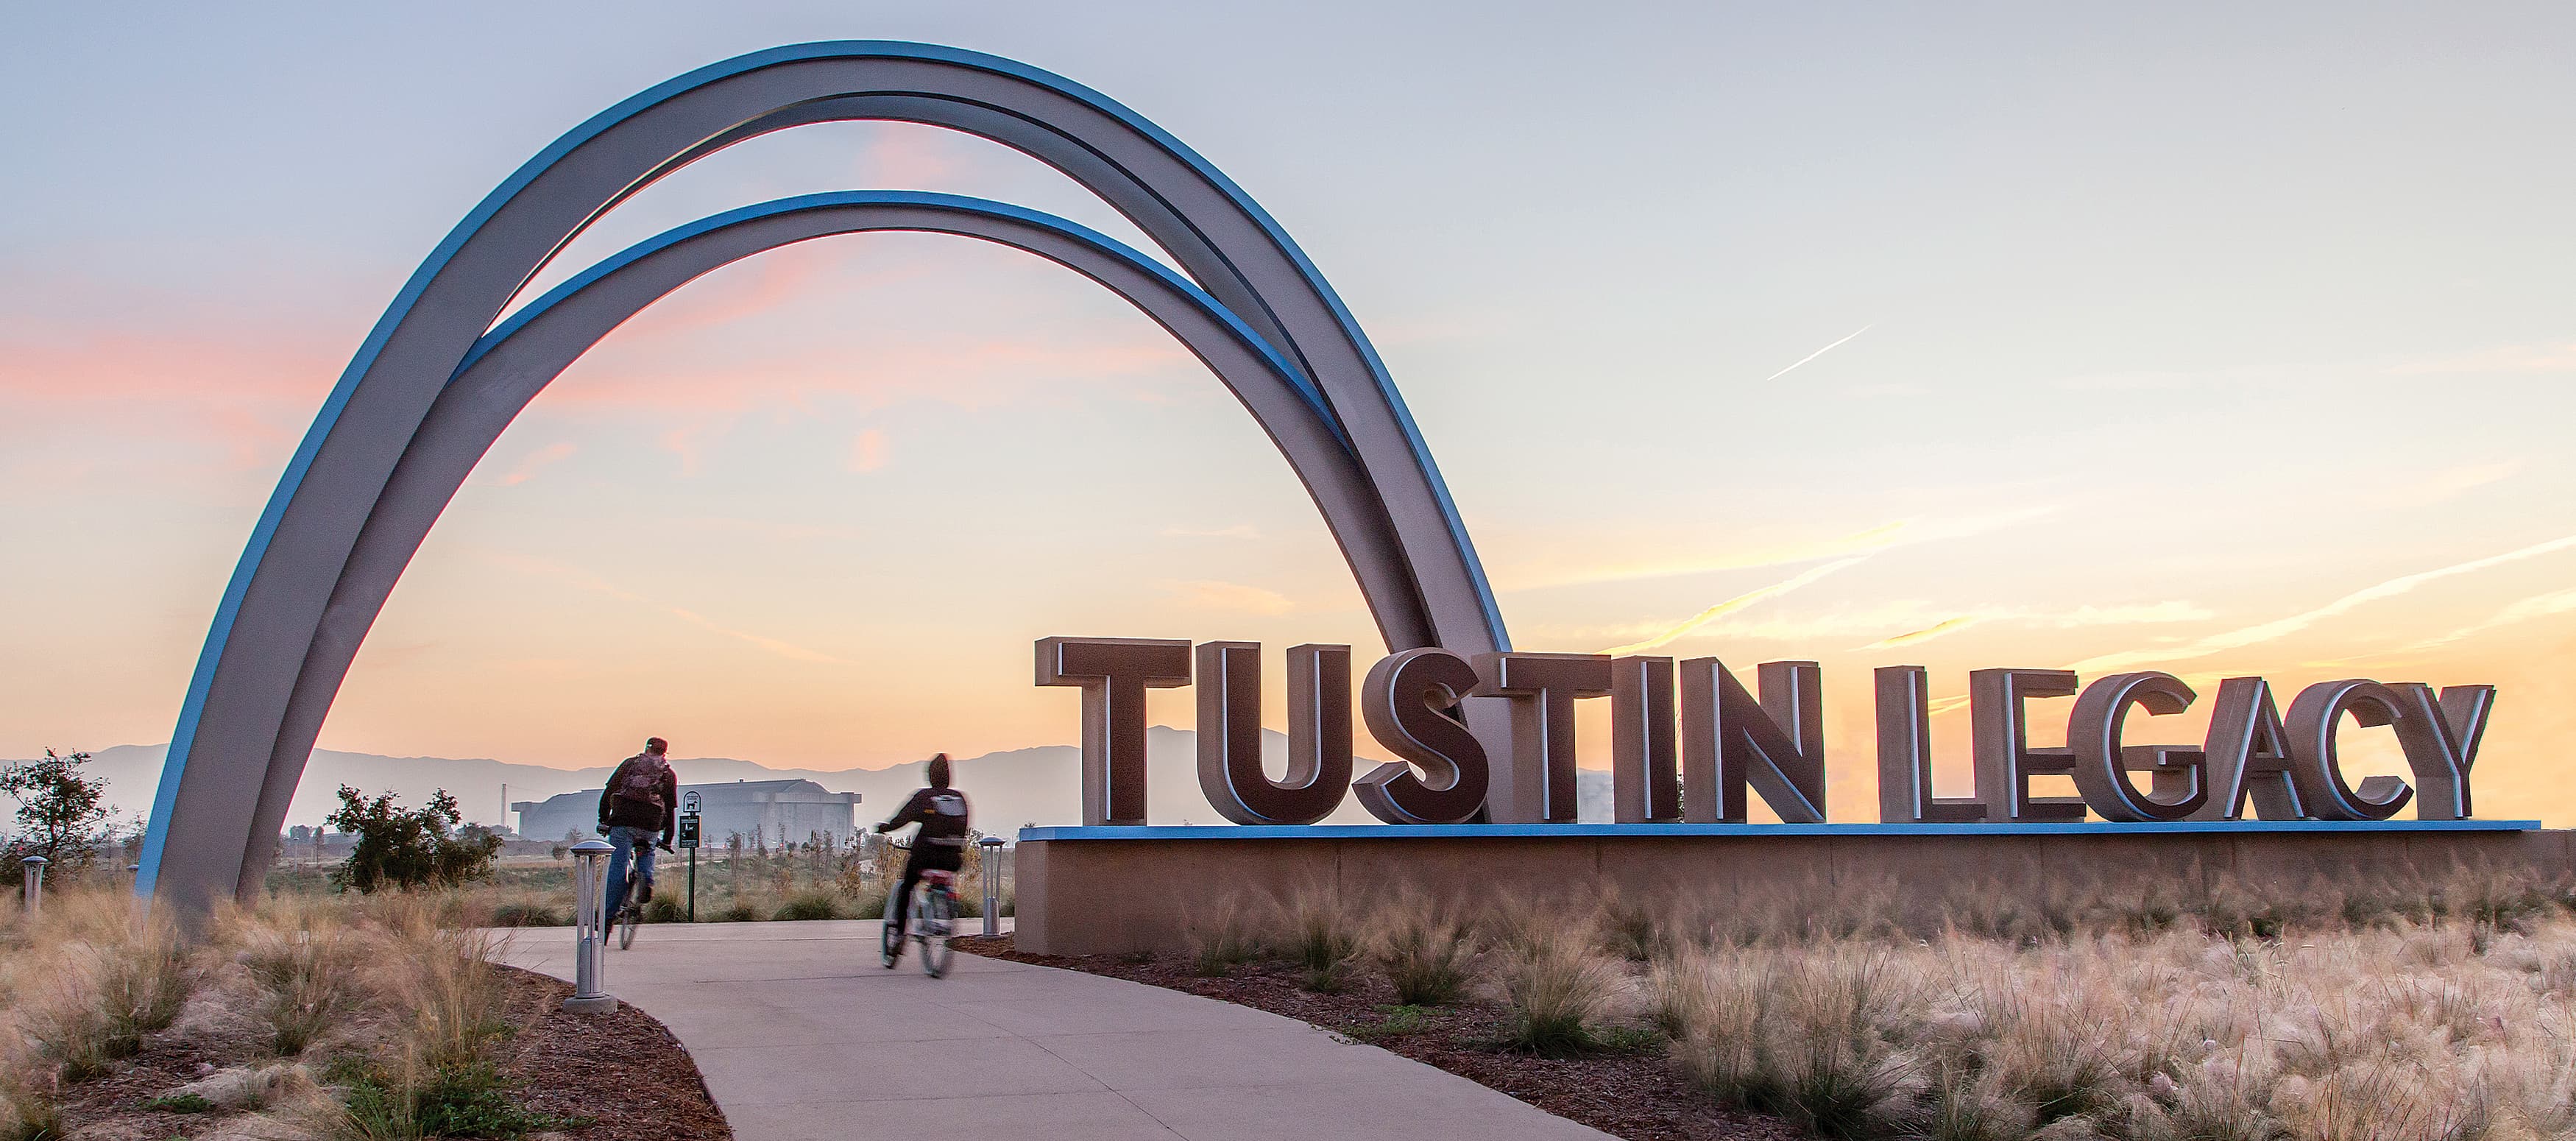 Two people riding bikes under a large arch that says Tustin Legacy.